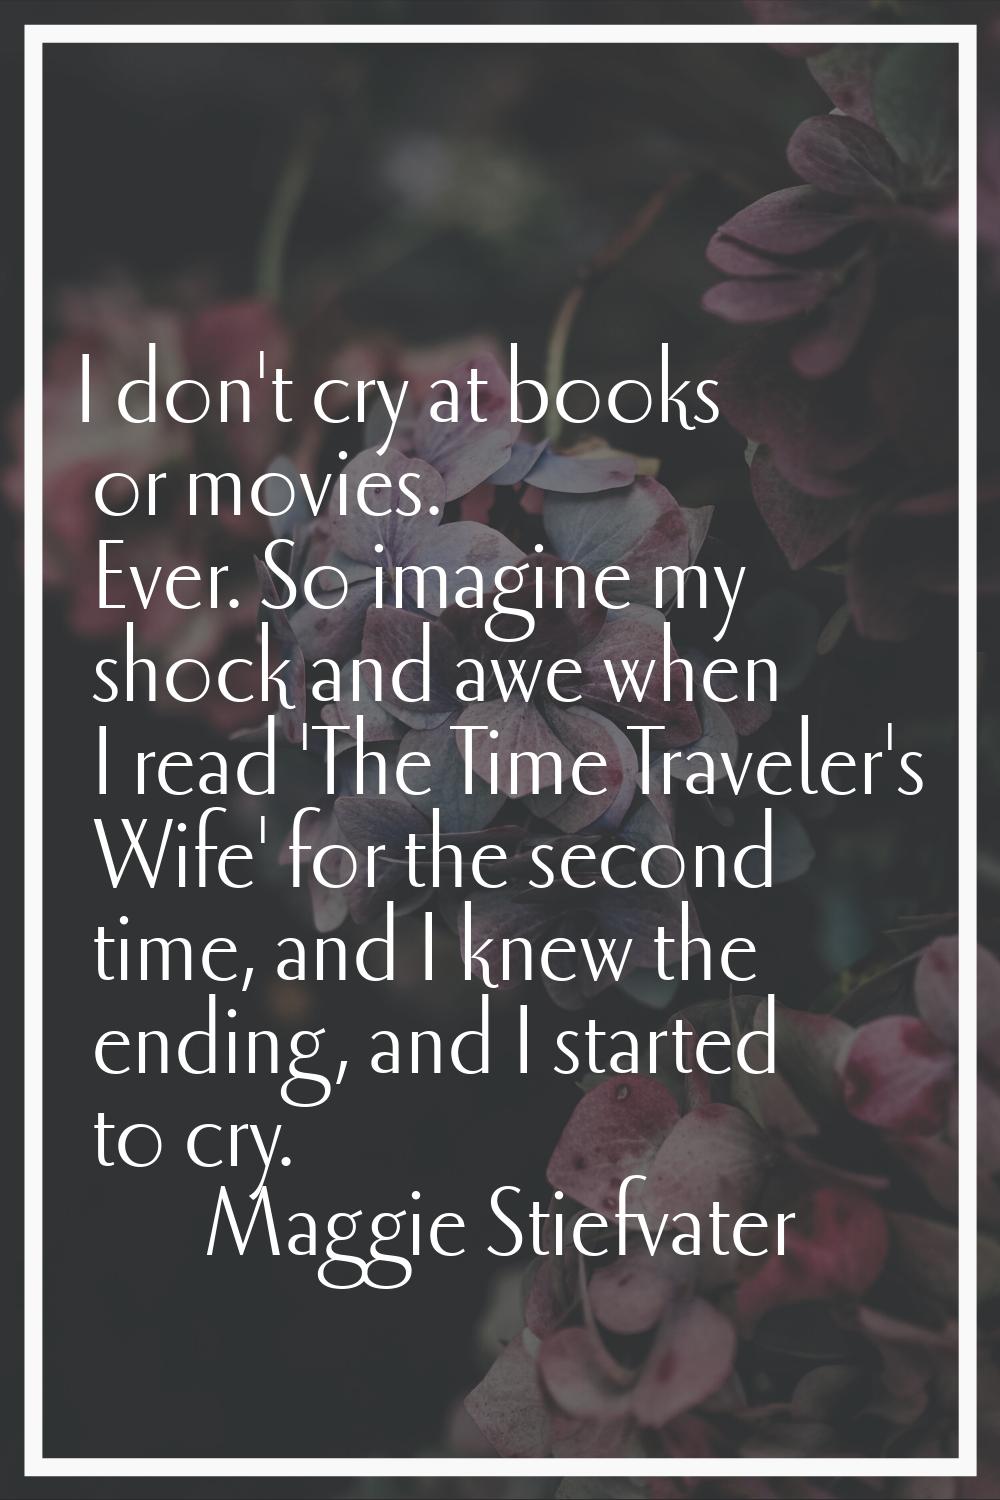 I don't cry at books or movies. Ever. So imagine my shock and awe when I read 'The Time Traveler's 